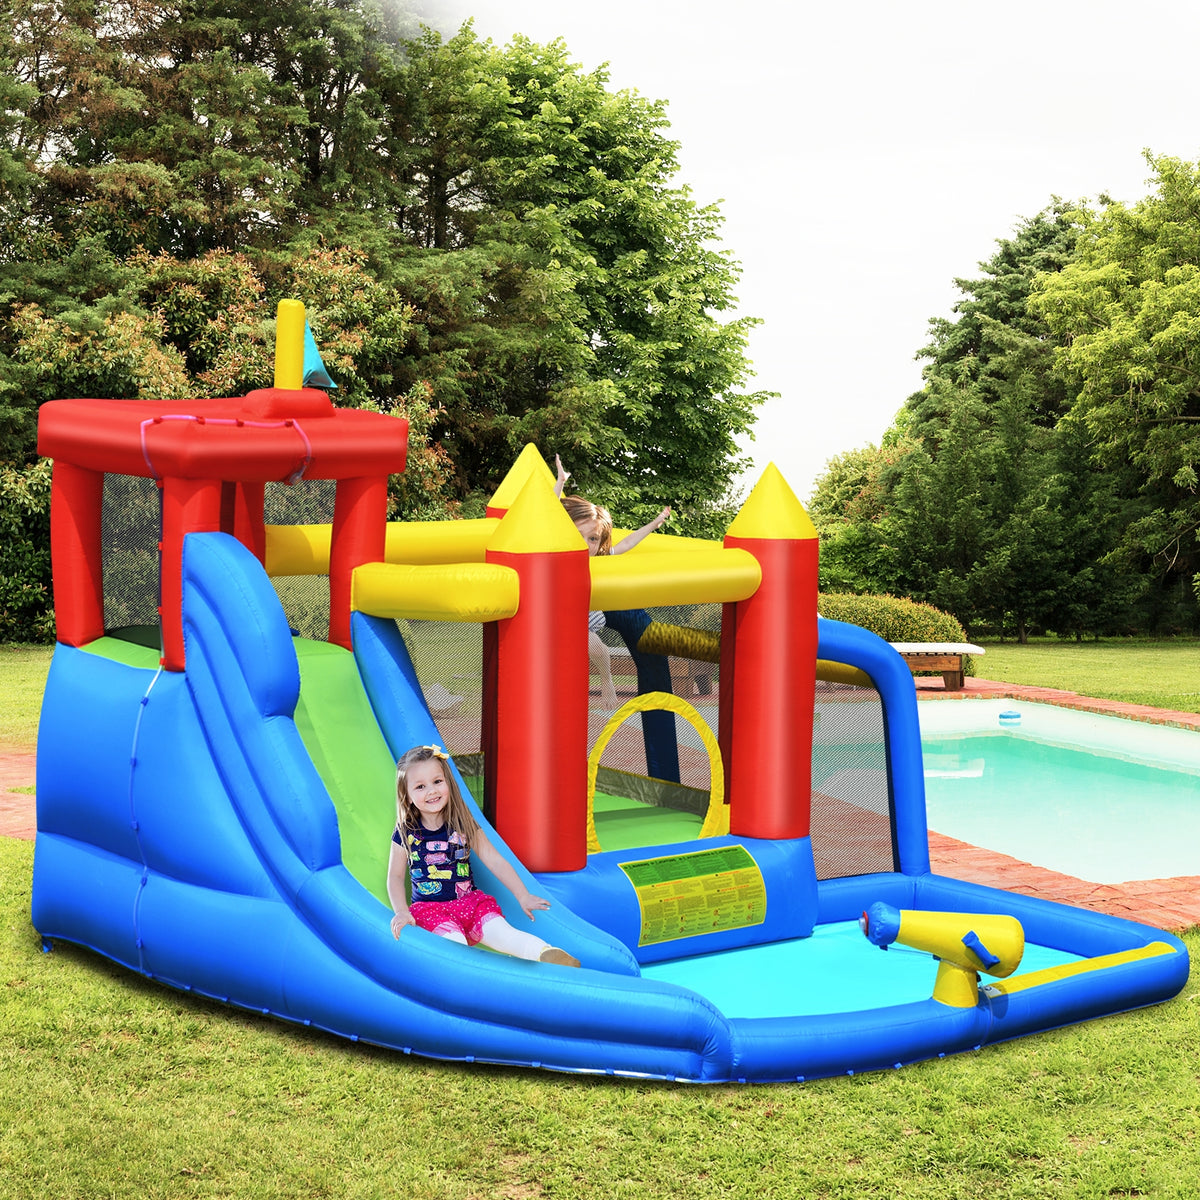 7-in-1 Inflatable Bounce House Splash Pool with Water Climb Slide with Blower